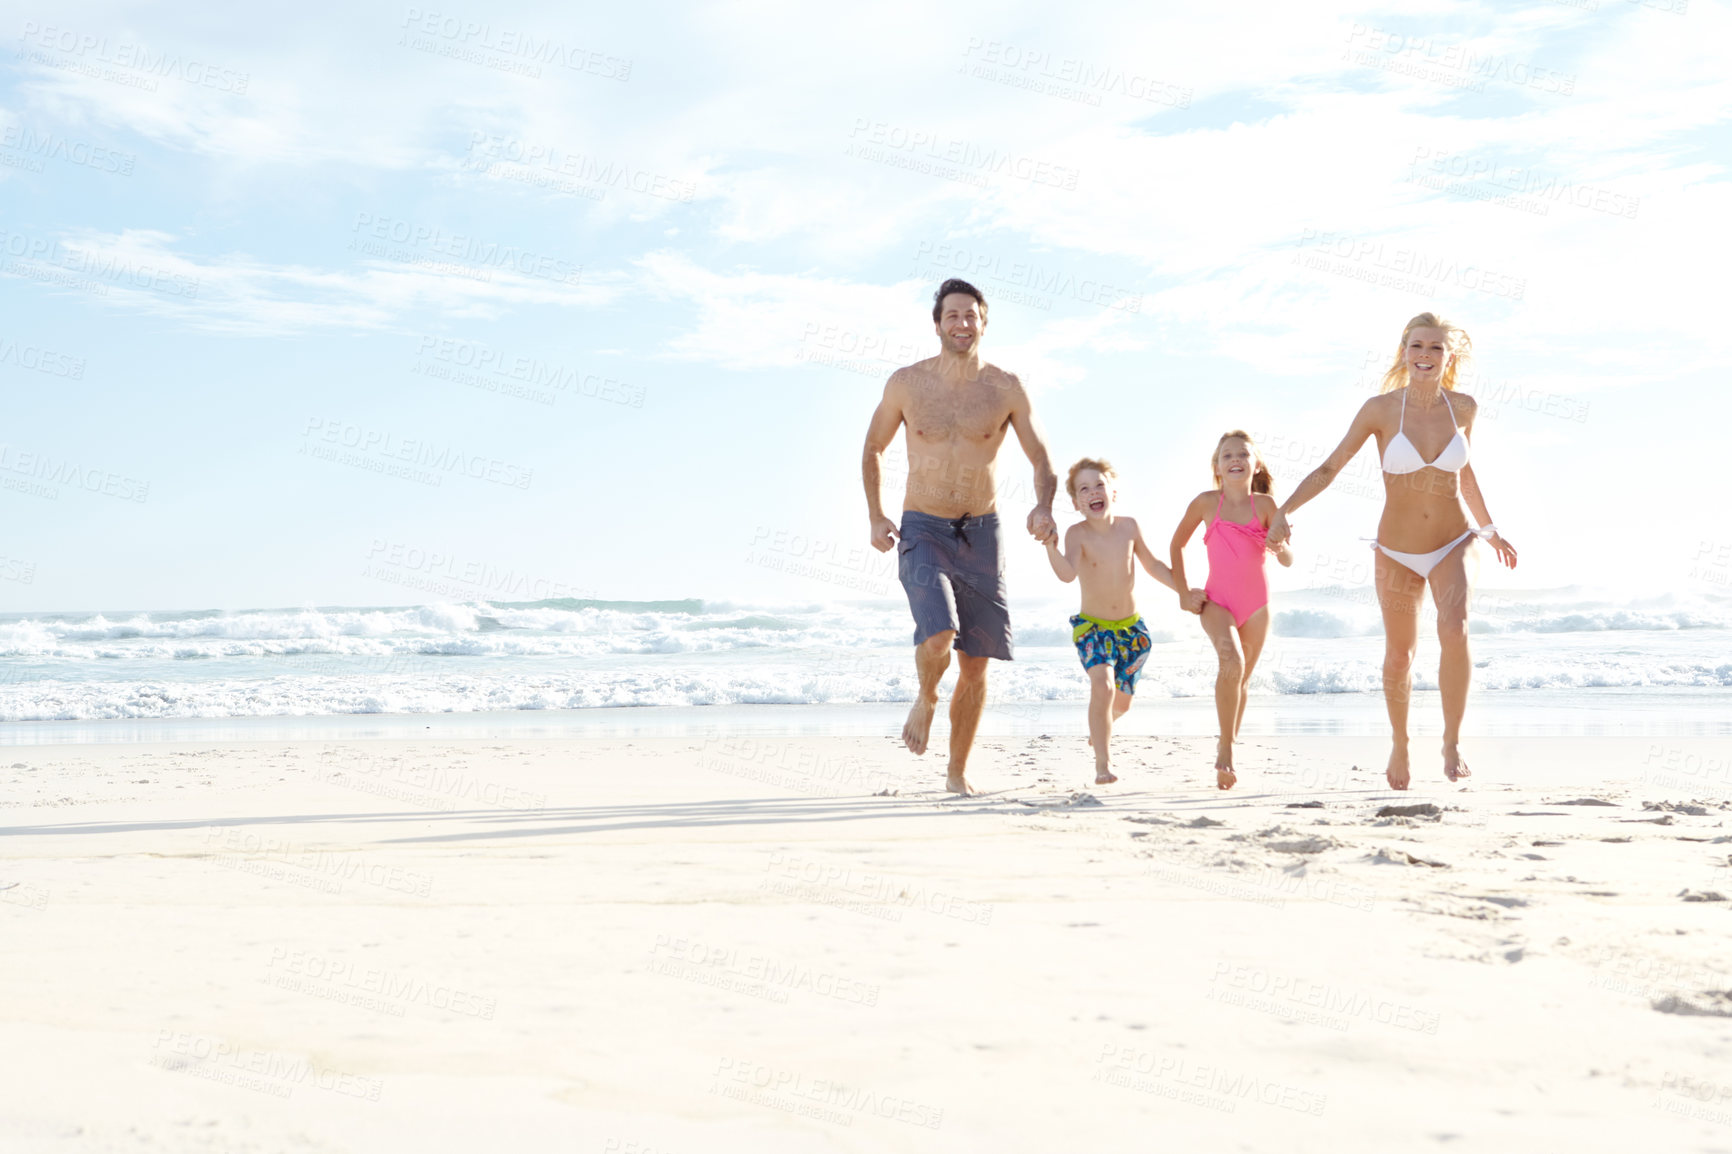 Buy stock photo Shot of a happy young family running on the beach together